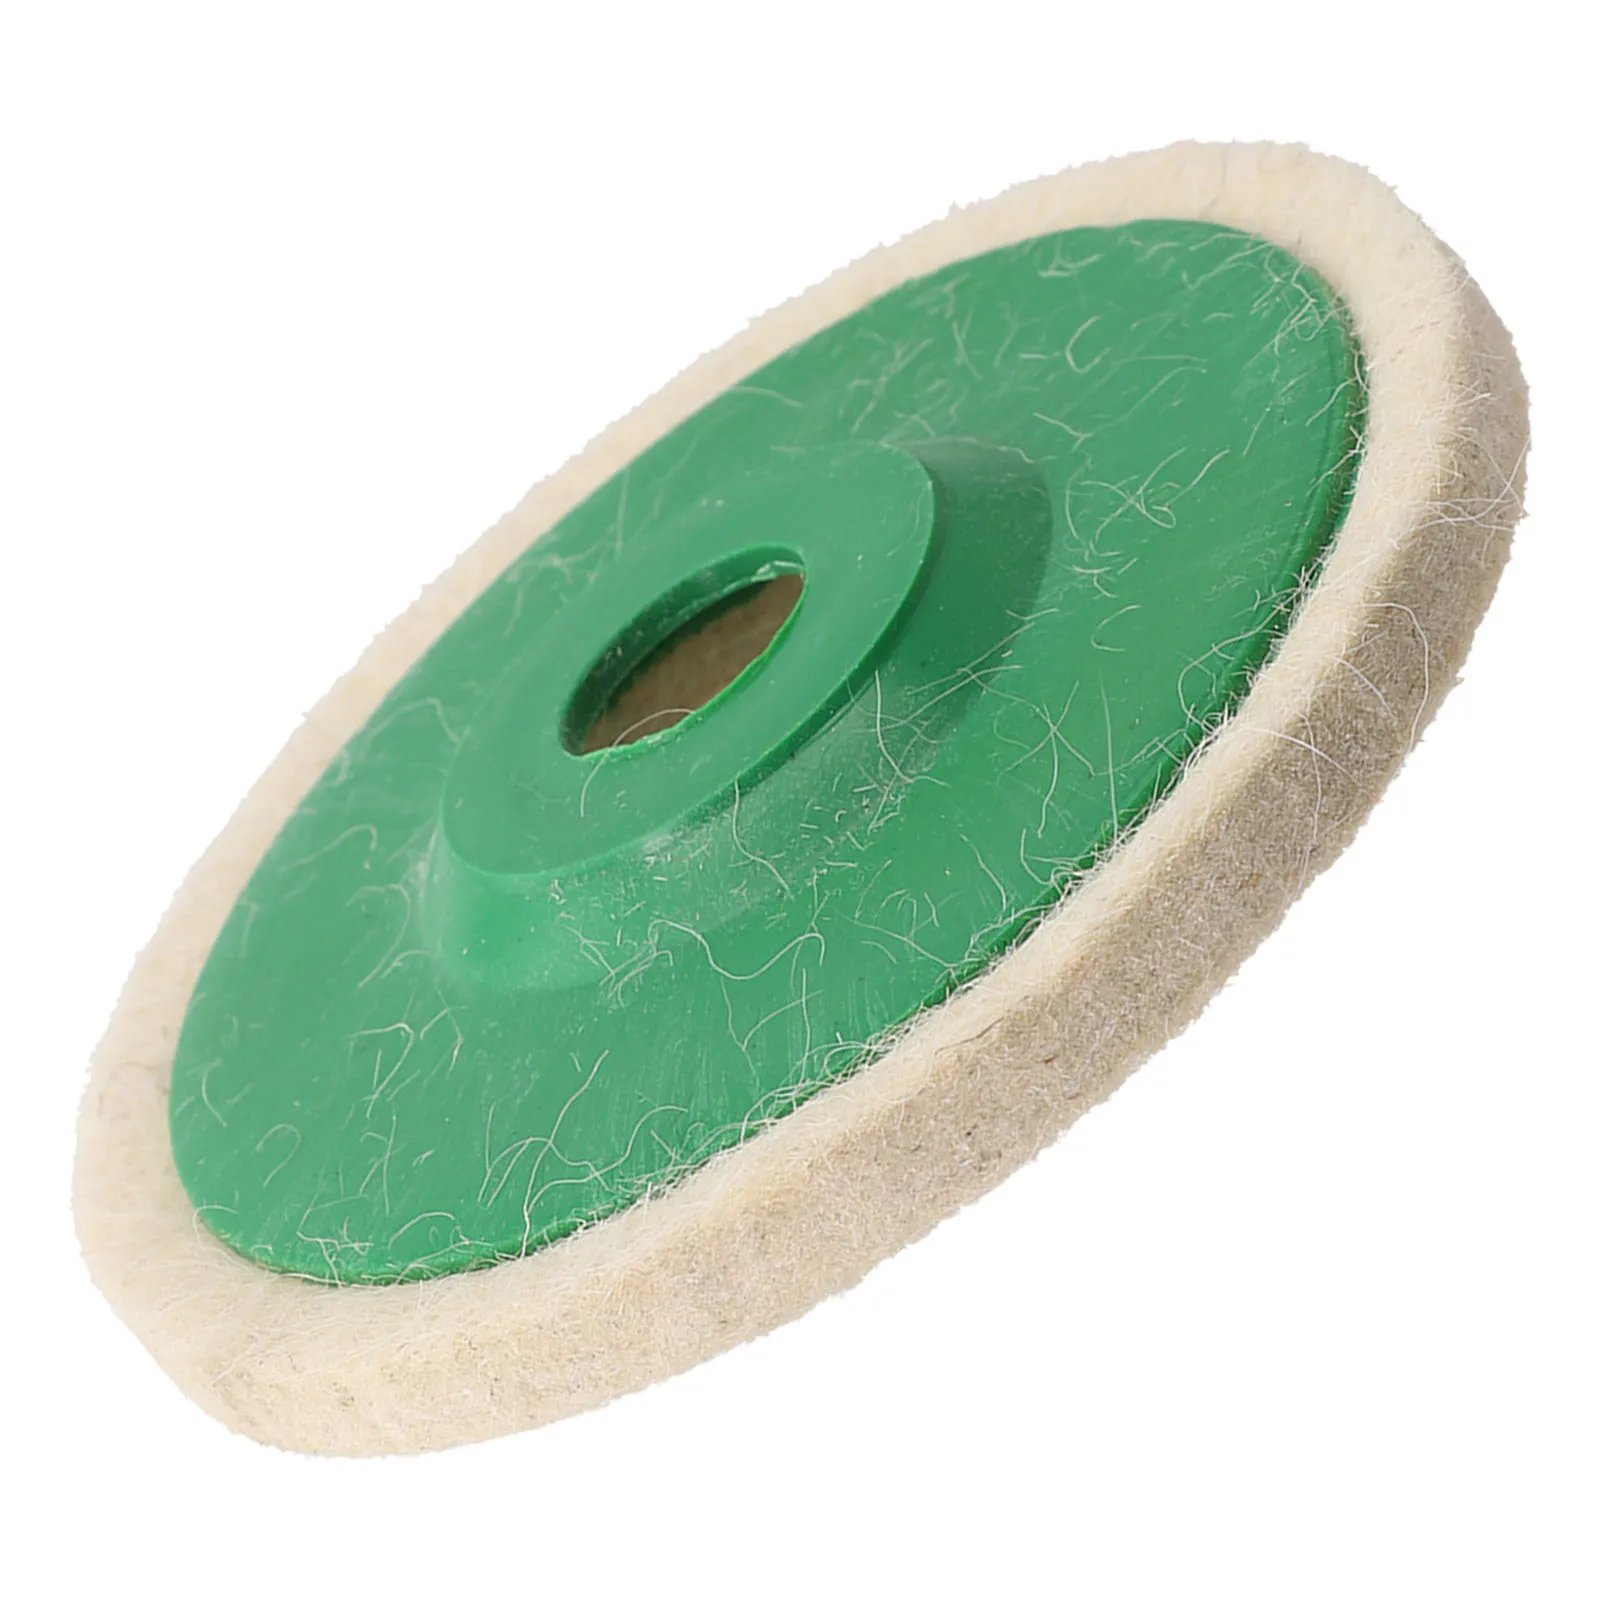 1 Pc 5Inch Wool Polishing Wheels Buffing Pads Angle Grinder Accessories Grinding Disc For Metal Glass Ceramic Polishing Tools 10 pcs wool polishing wheel buffing pads angle grinder wheel felt polishing pad disc angle grinder accessories for car maintain